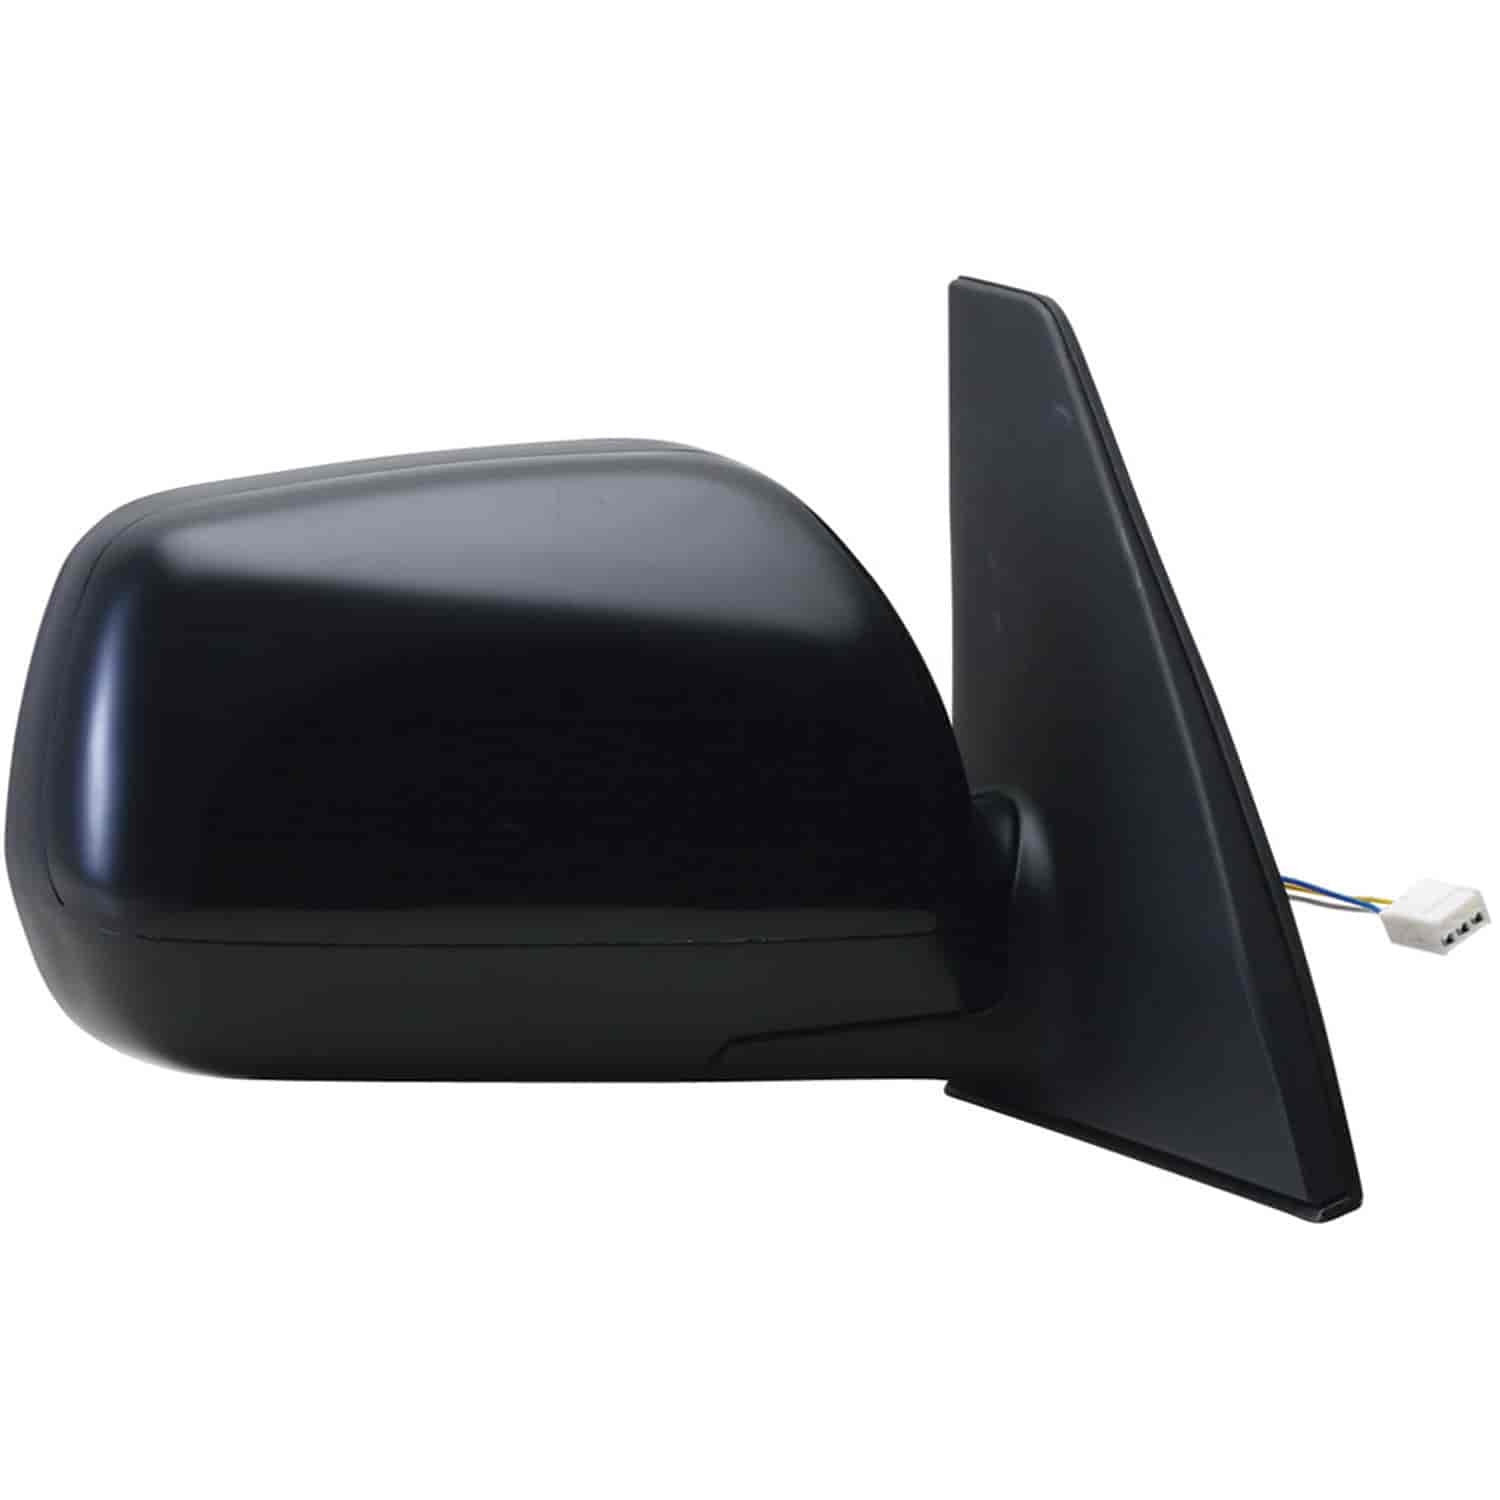 OEM Style Replacement mirror for 01-05 Toyota RAV4 passenger side mirror tested to fit and function